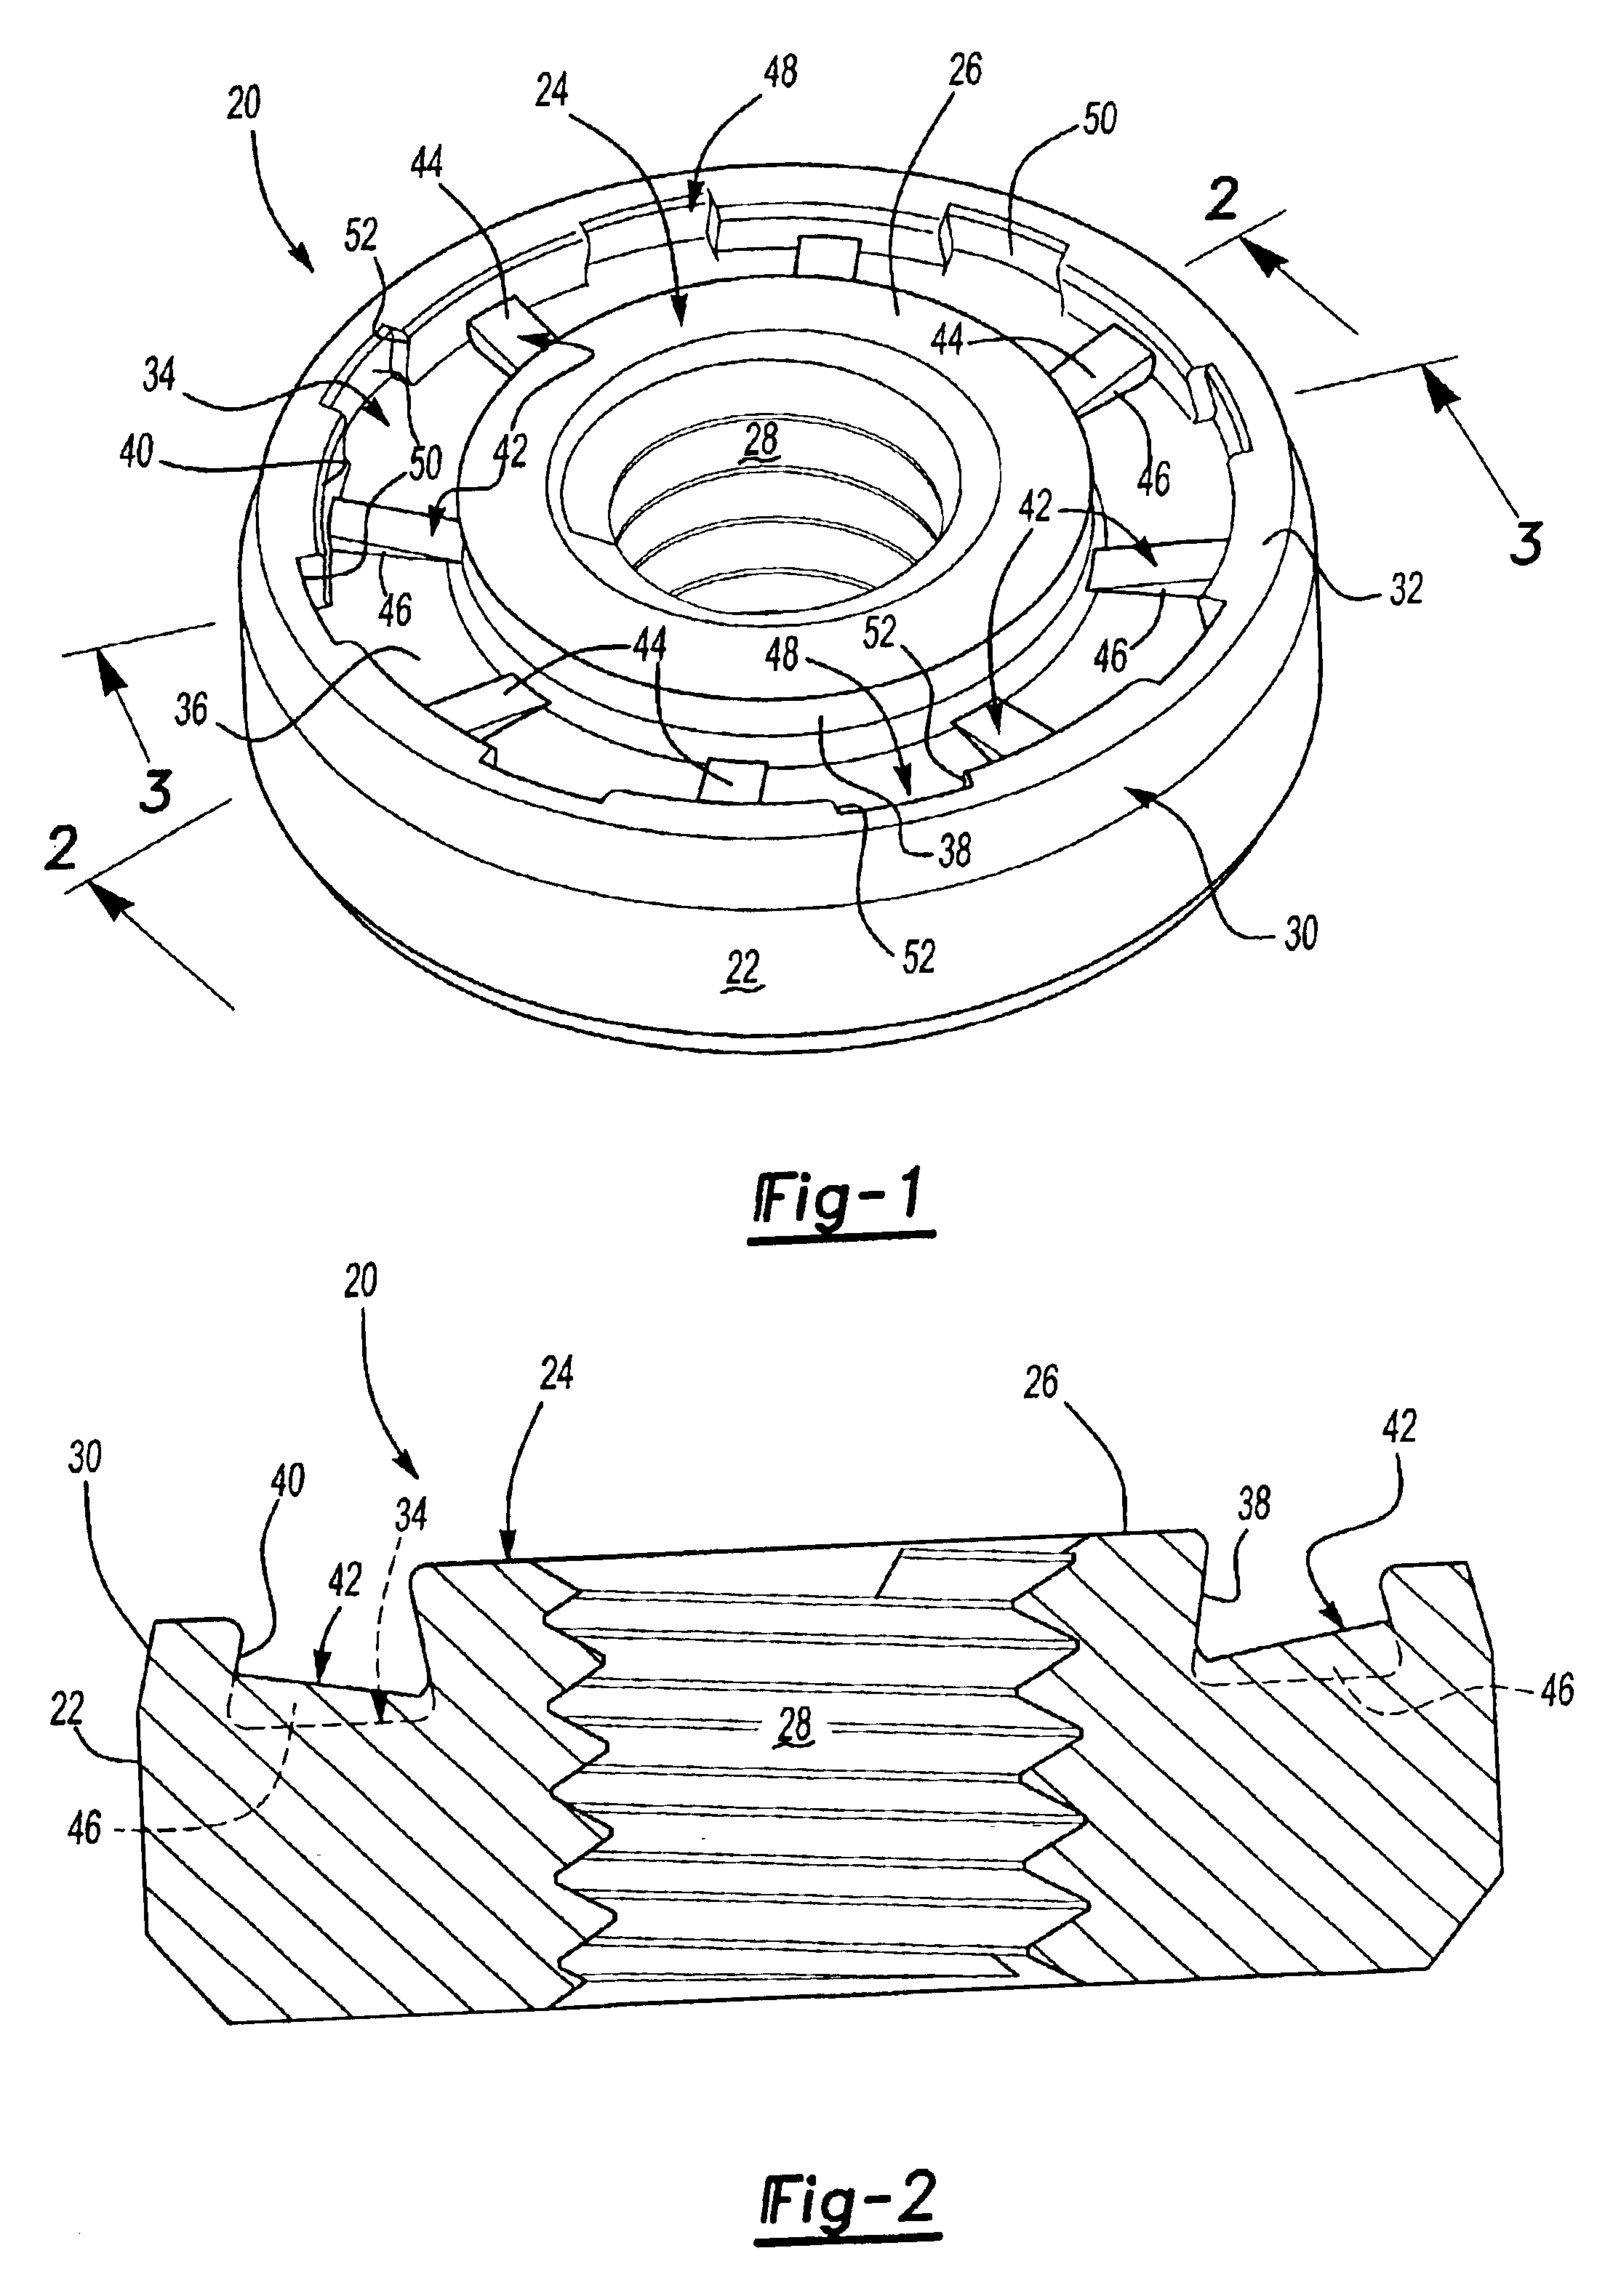 Self-attaching female fastener and method of installation